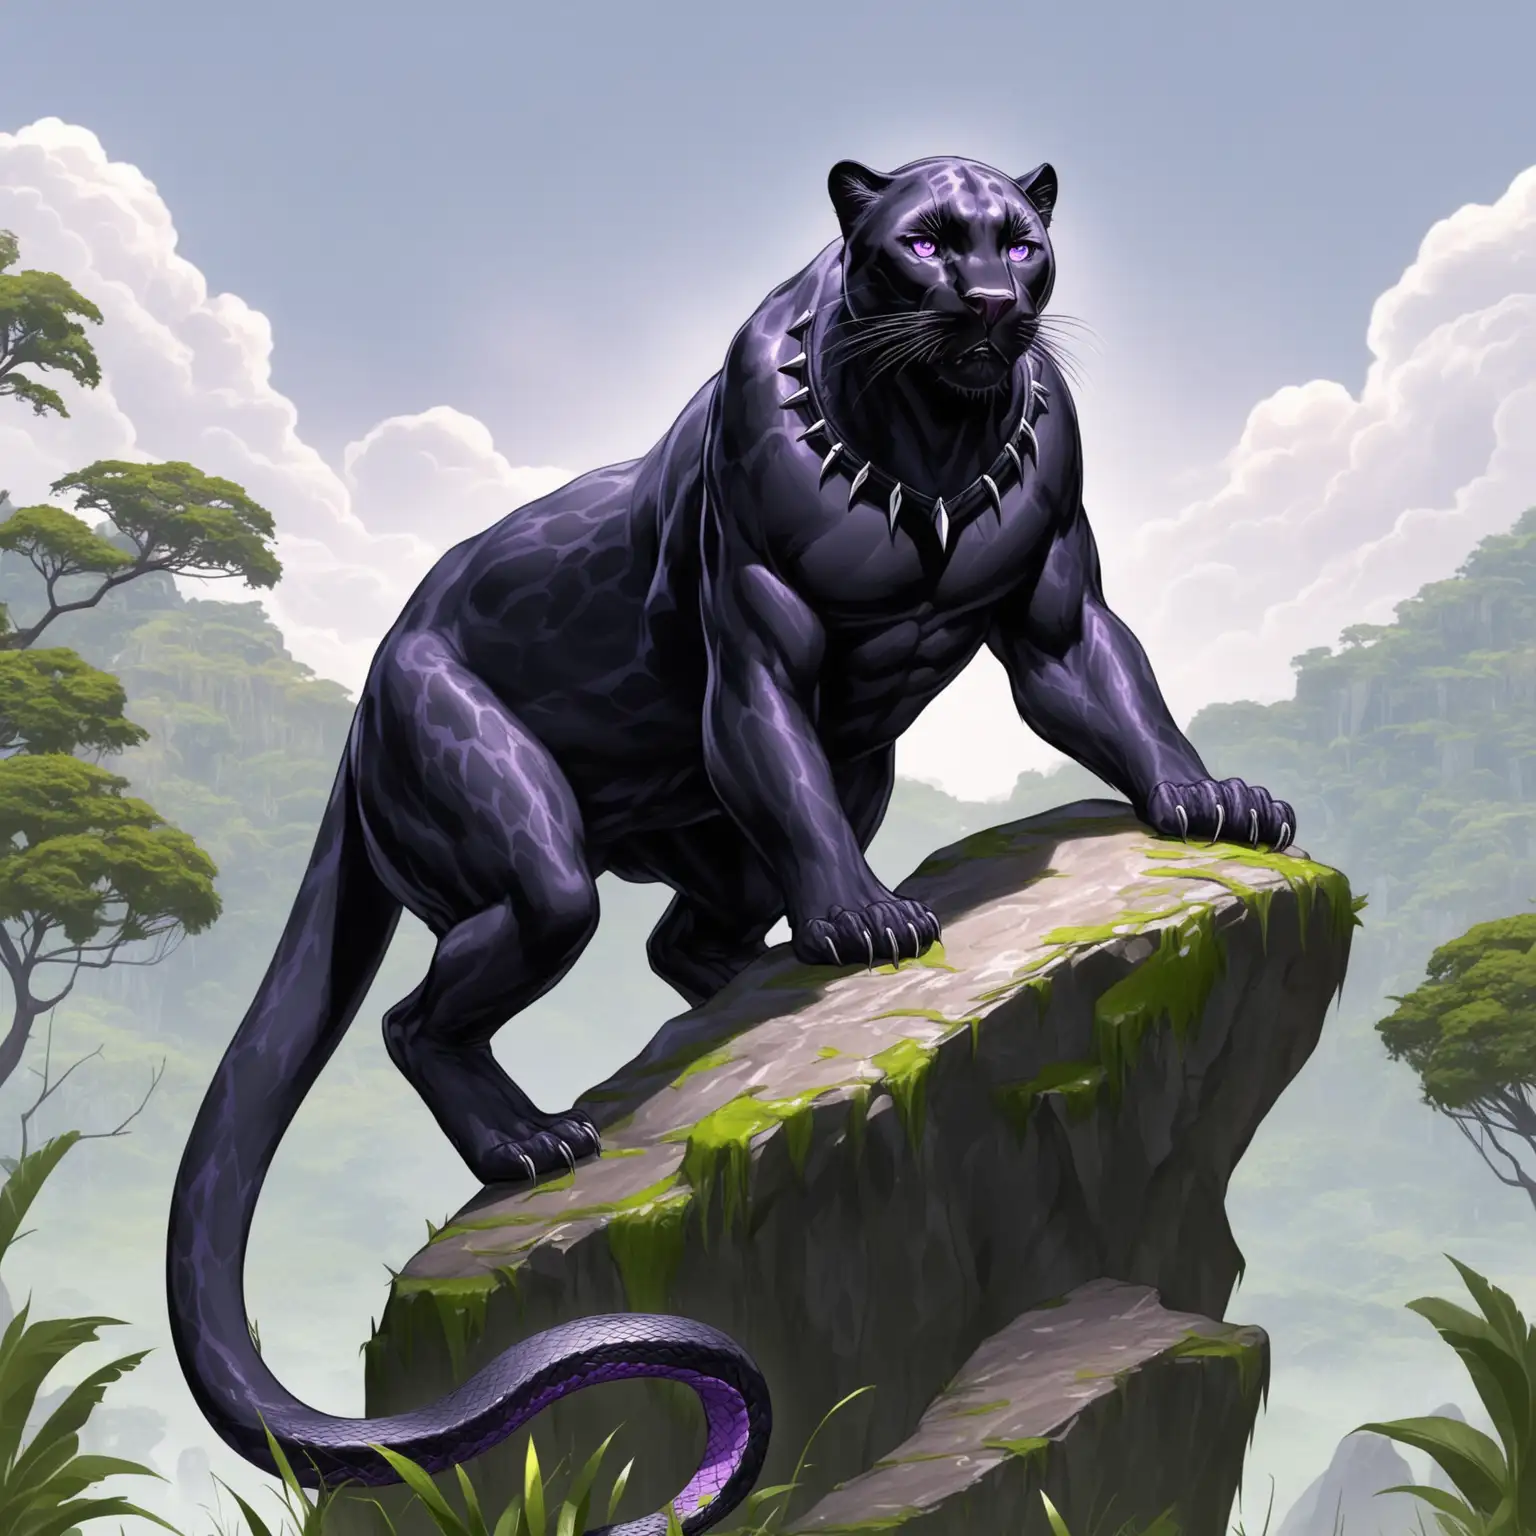 Majestic Black Panther with Snake Tail on Rocky Outcrop